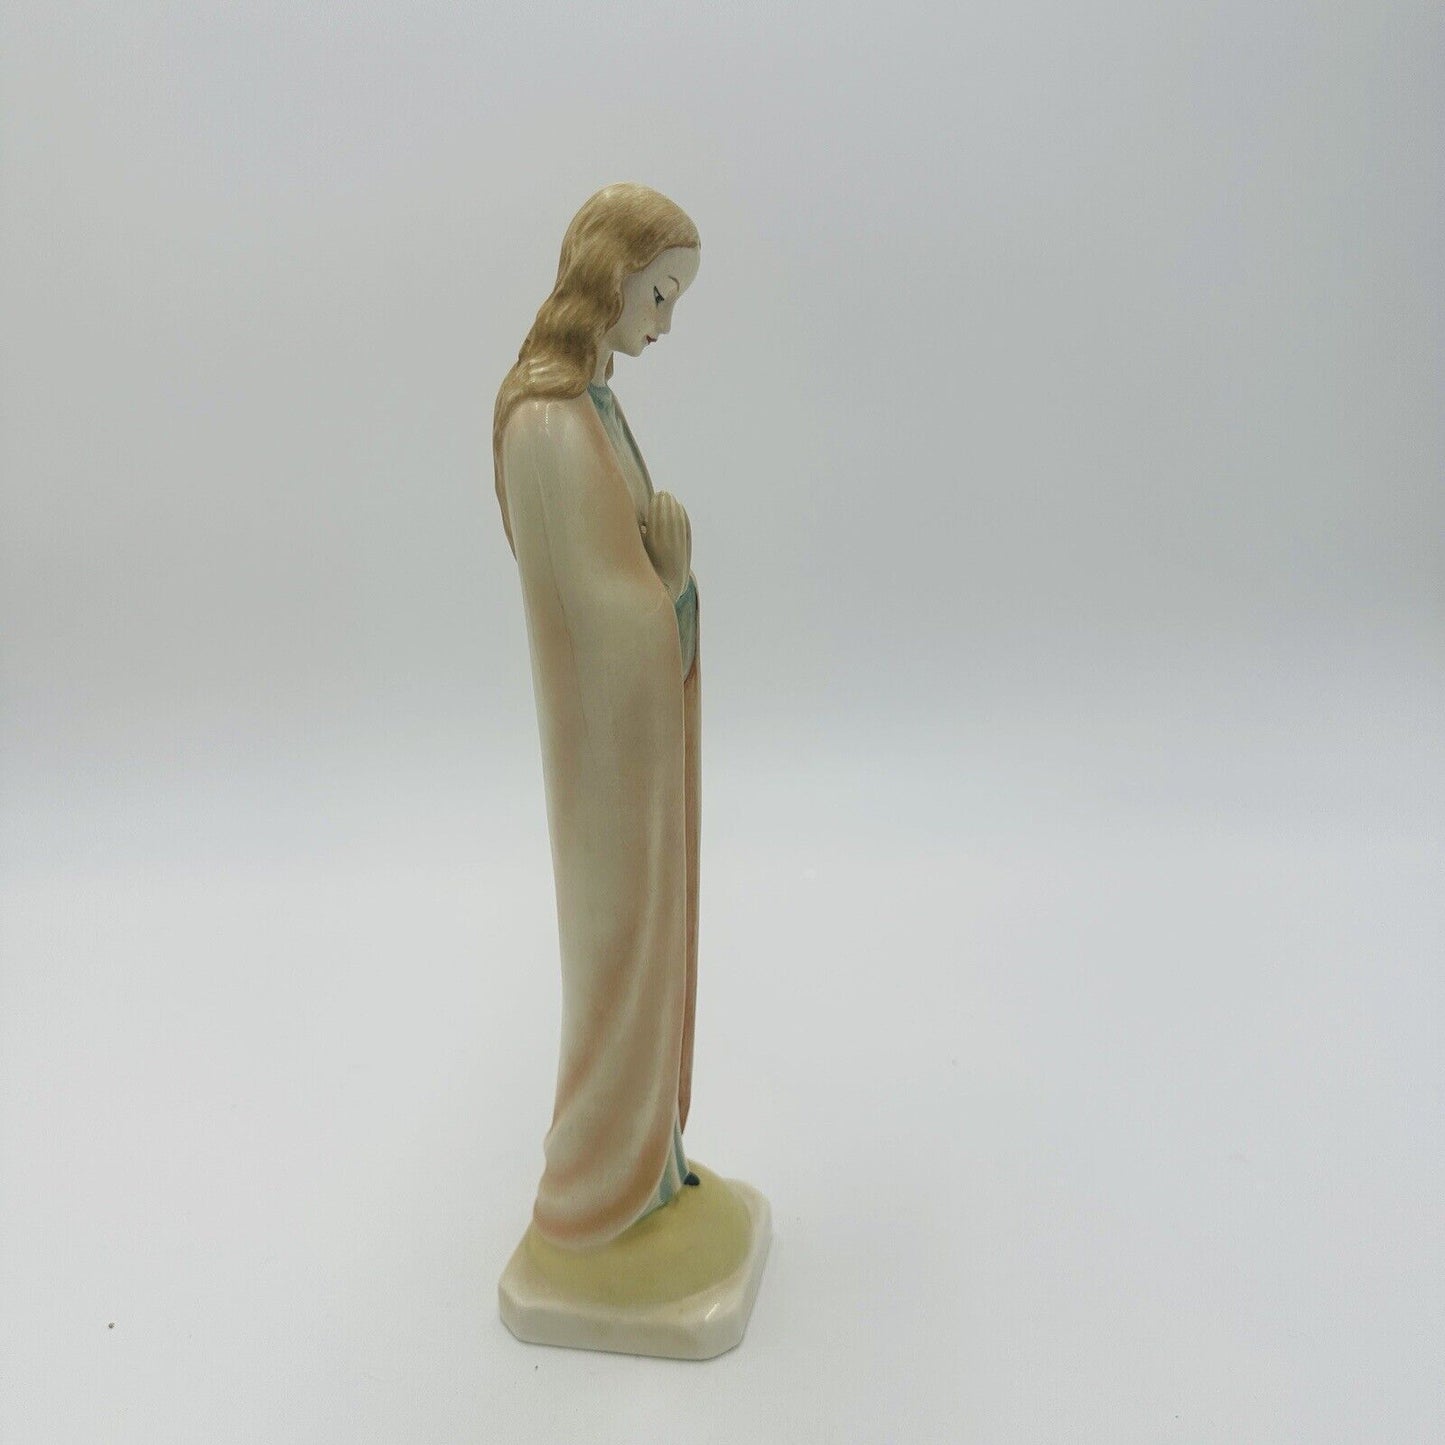 Hummel Madonna #46/0 Figurine Made in Western Germany 1950's Mary 10”